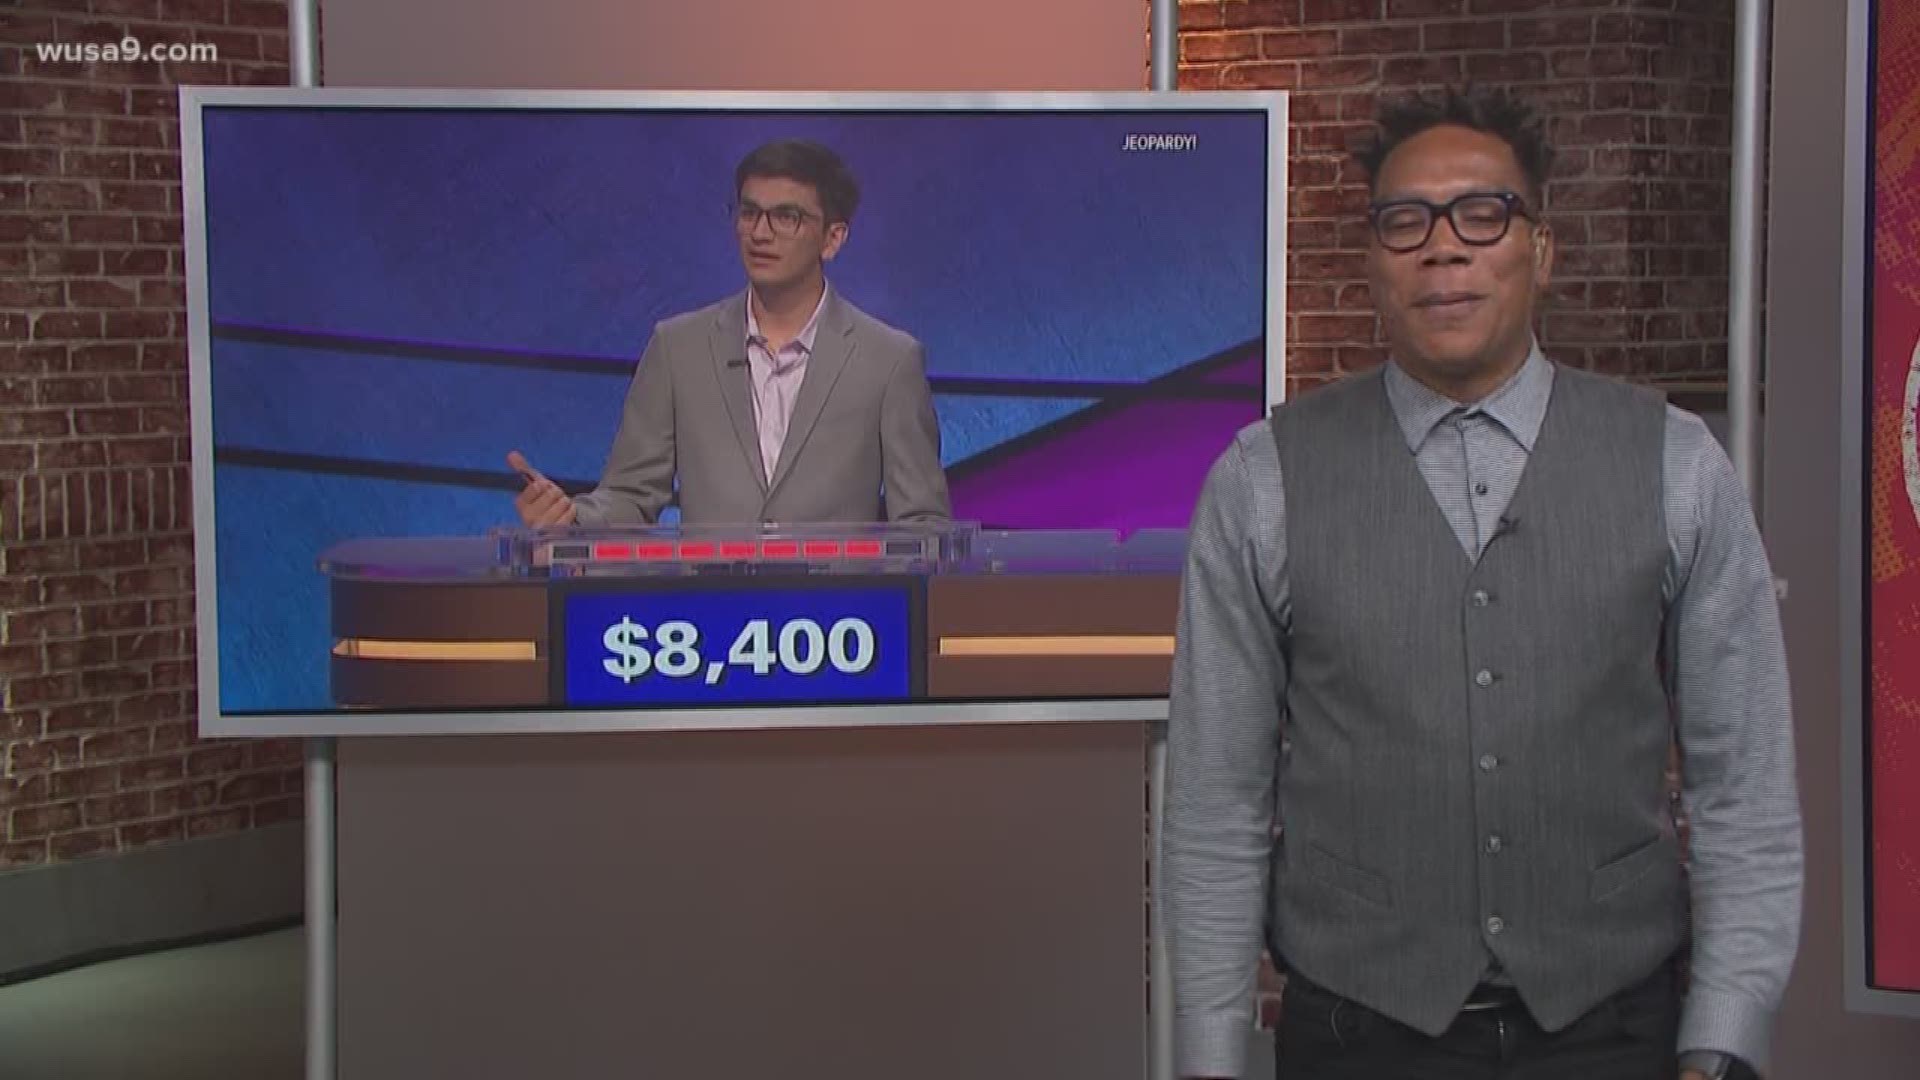 A Columbia University freshman who recently won $100,000 in a Jeopardy teen competition has donated $10,314 of his winnings to cancer research.